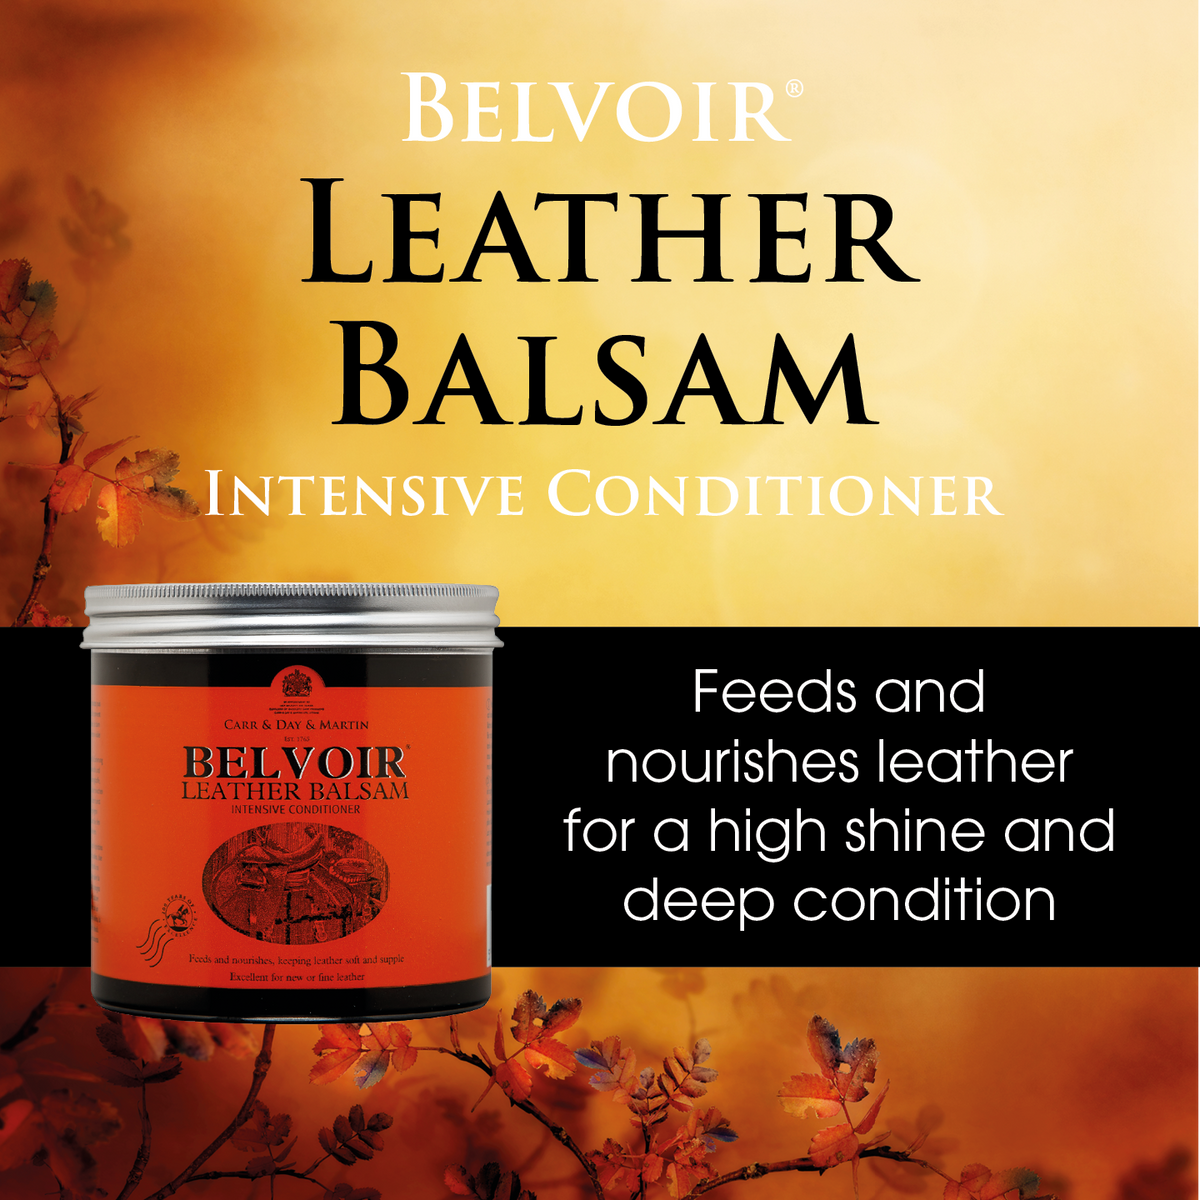 Belvoir Leather Balsam feeds and norishes leather for a high shine and deep condition.